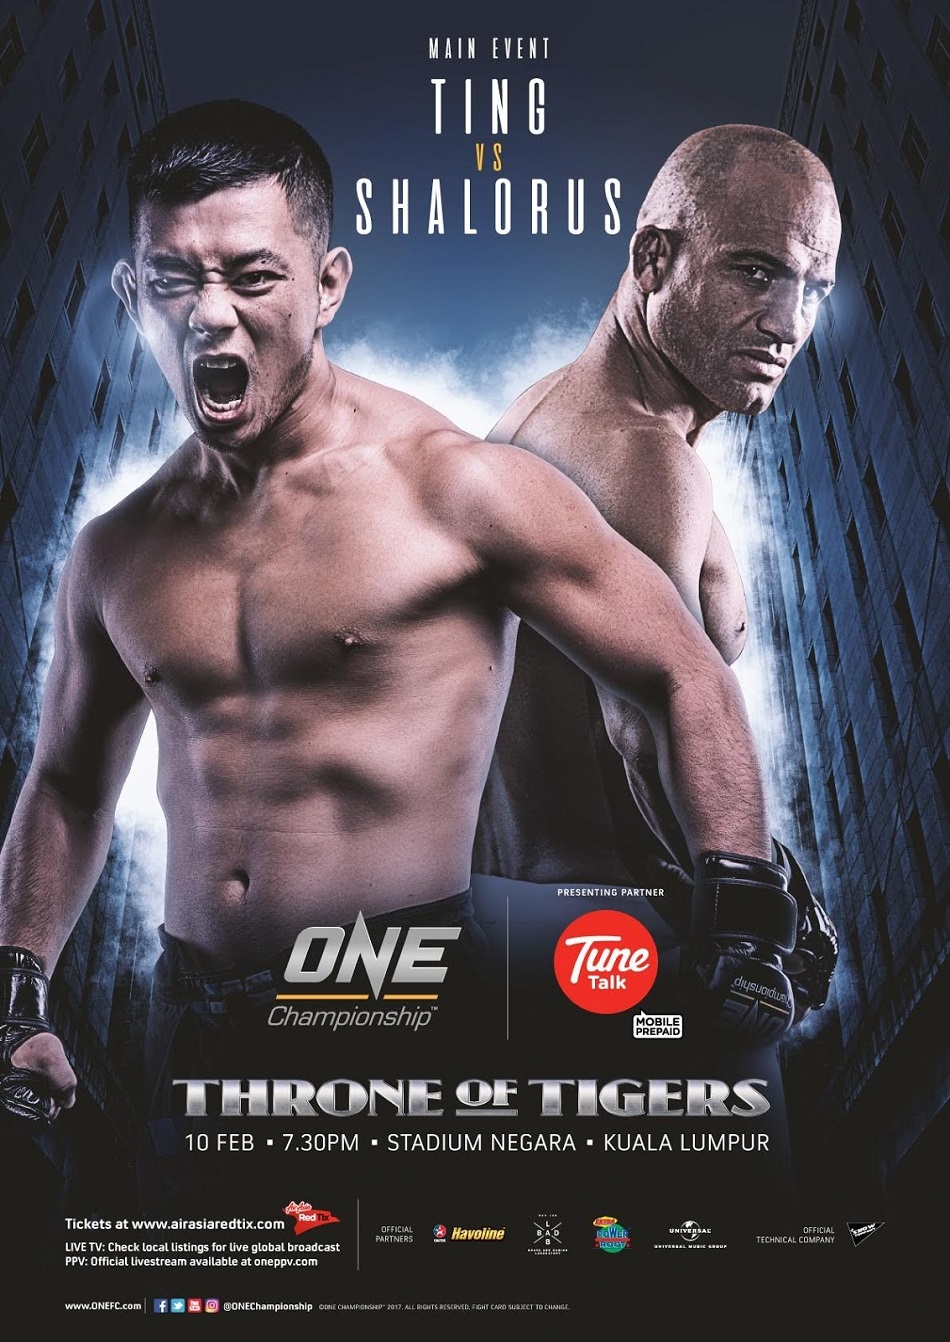 ONE Championship announces complete card for ONE: Throne of Tigers